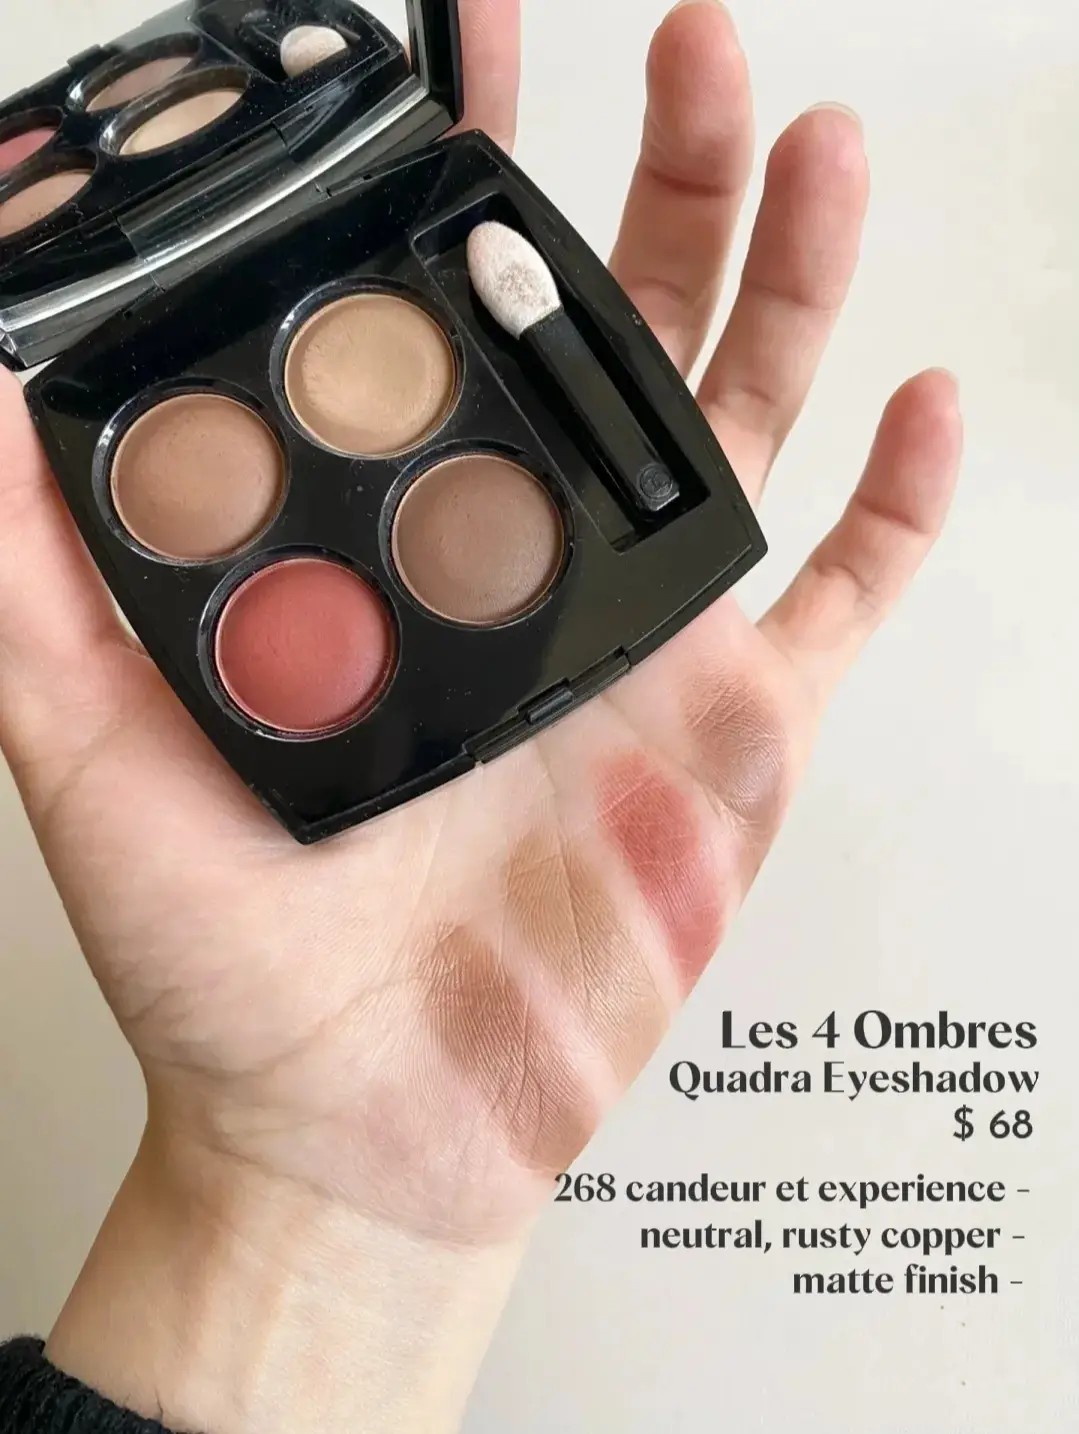 chanel quadra eyeshadow palettes review, Gallery posted by Olivia Smith